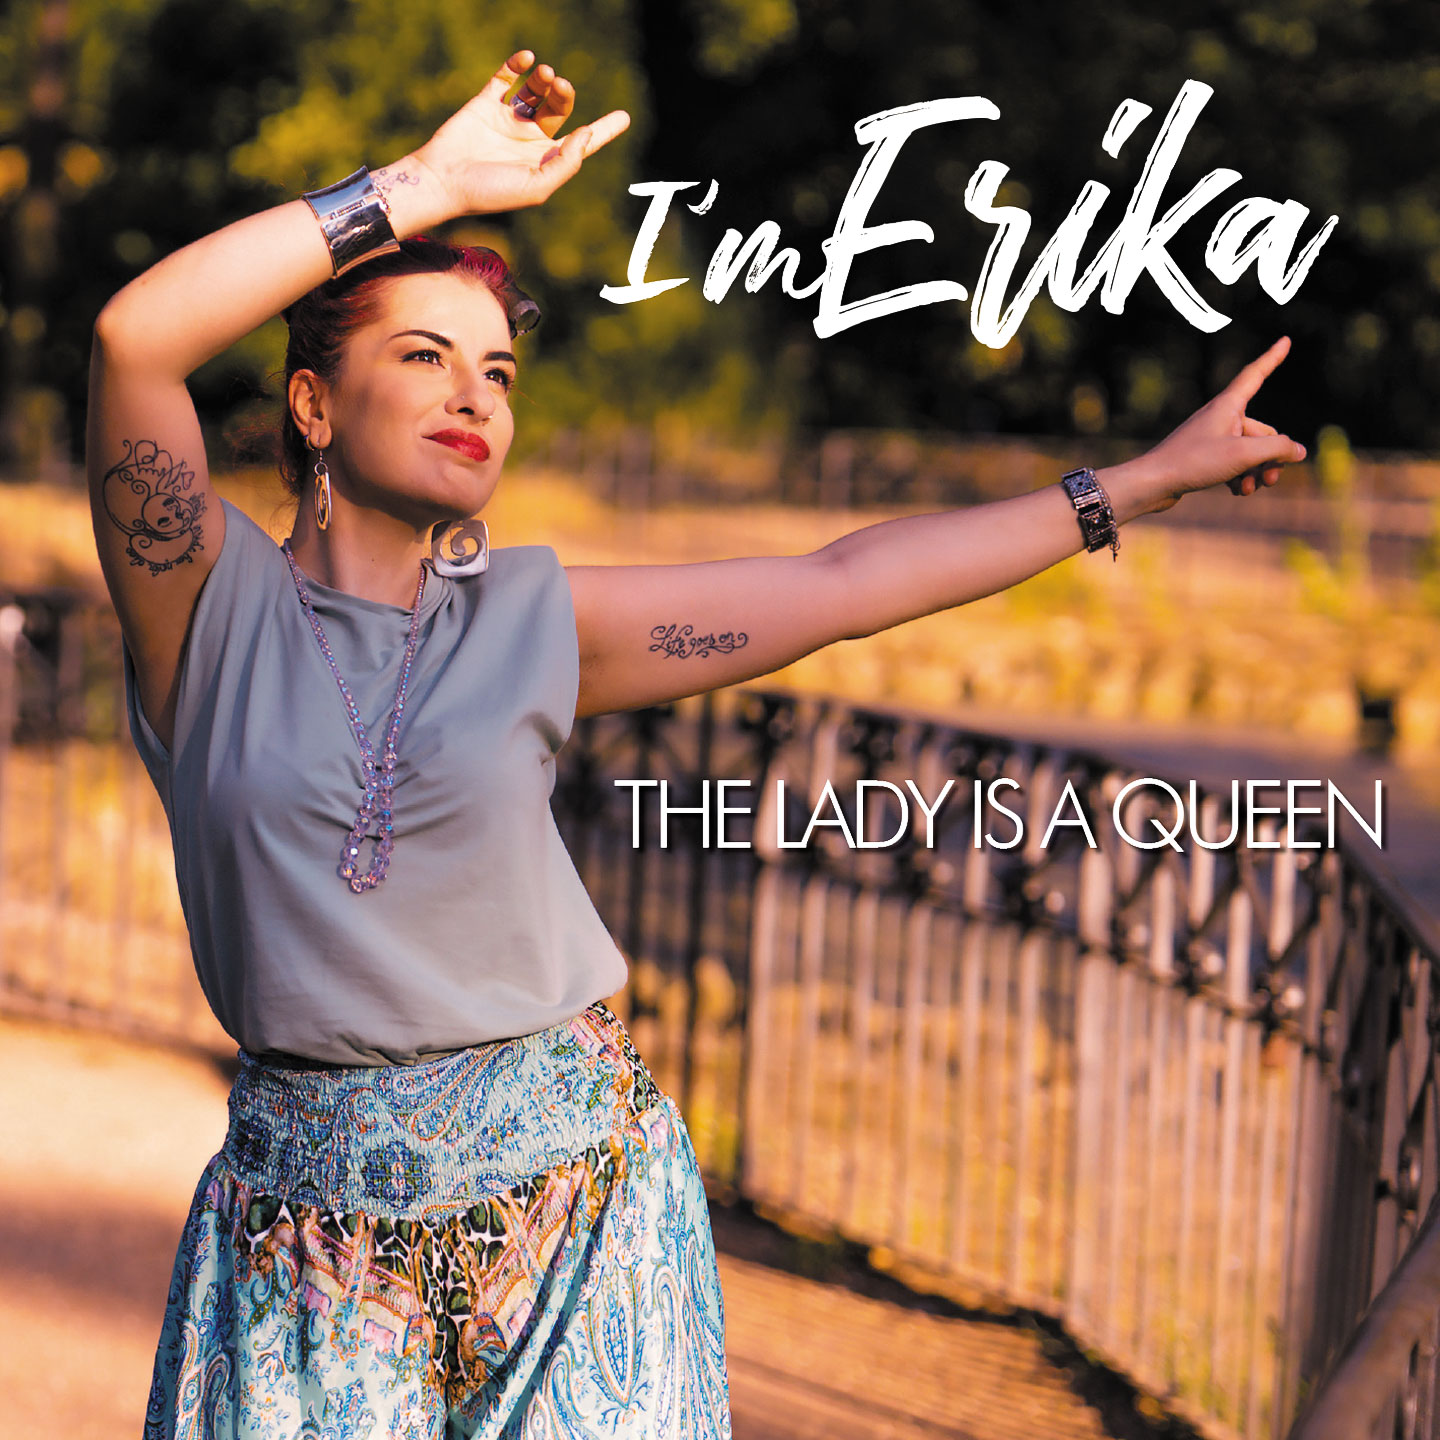 I’M ERIKA: dal 19 gennaio arriva in radio il nuovo singolo “The Lady is a Queen”